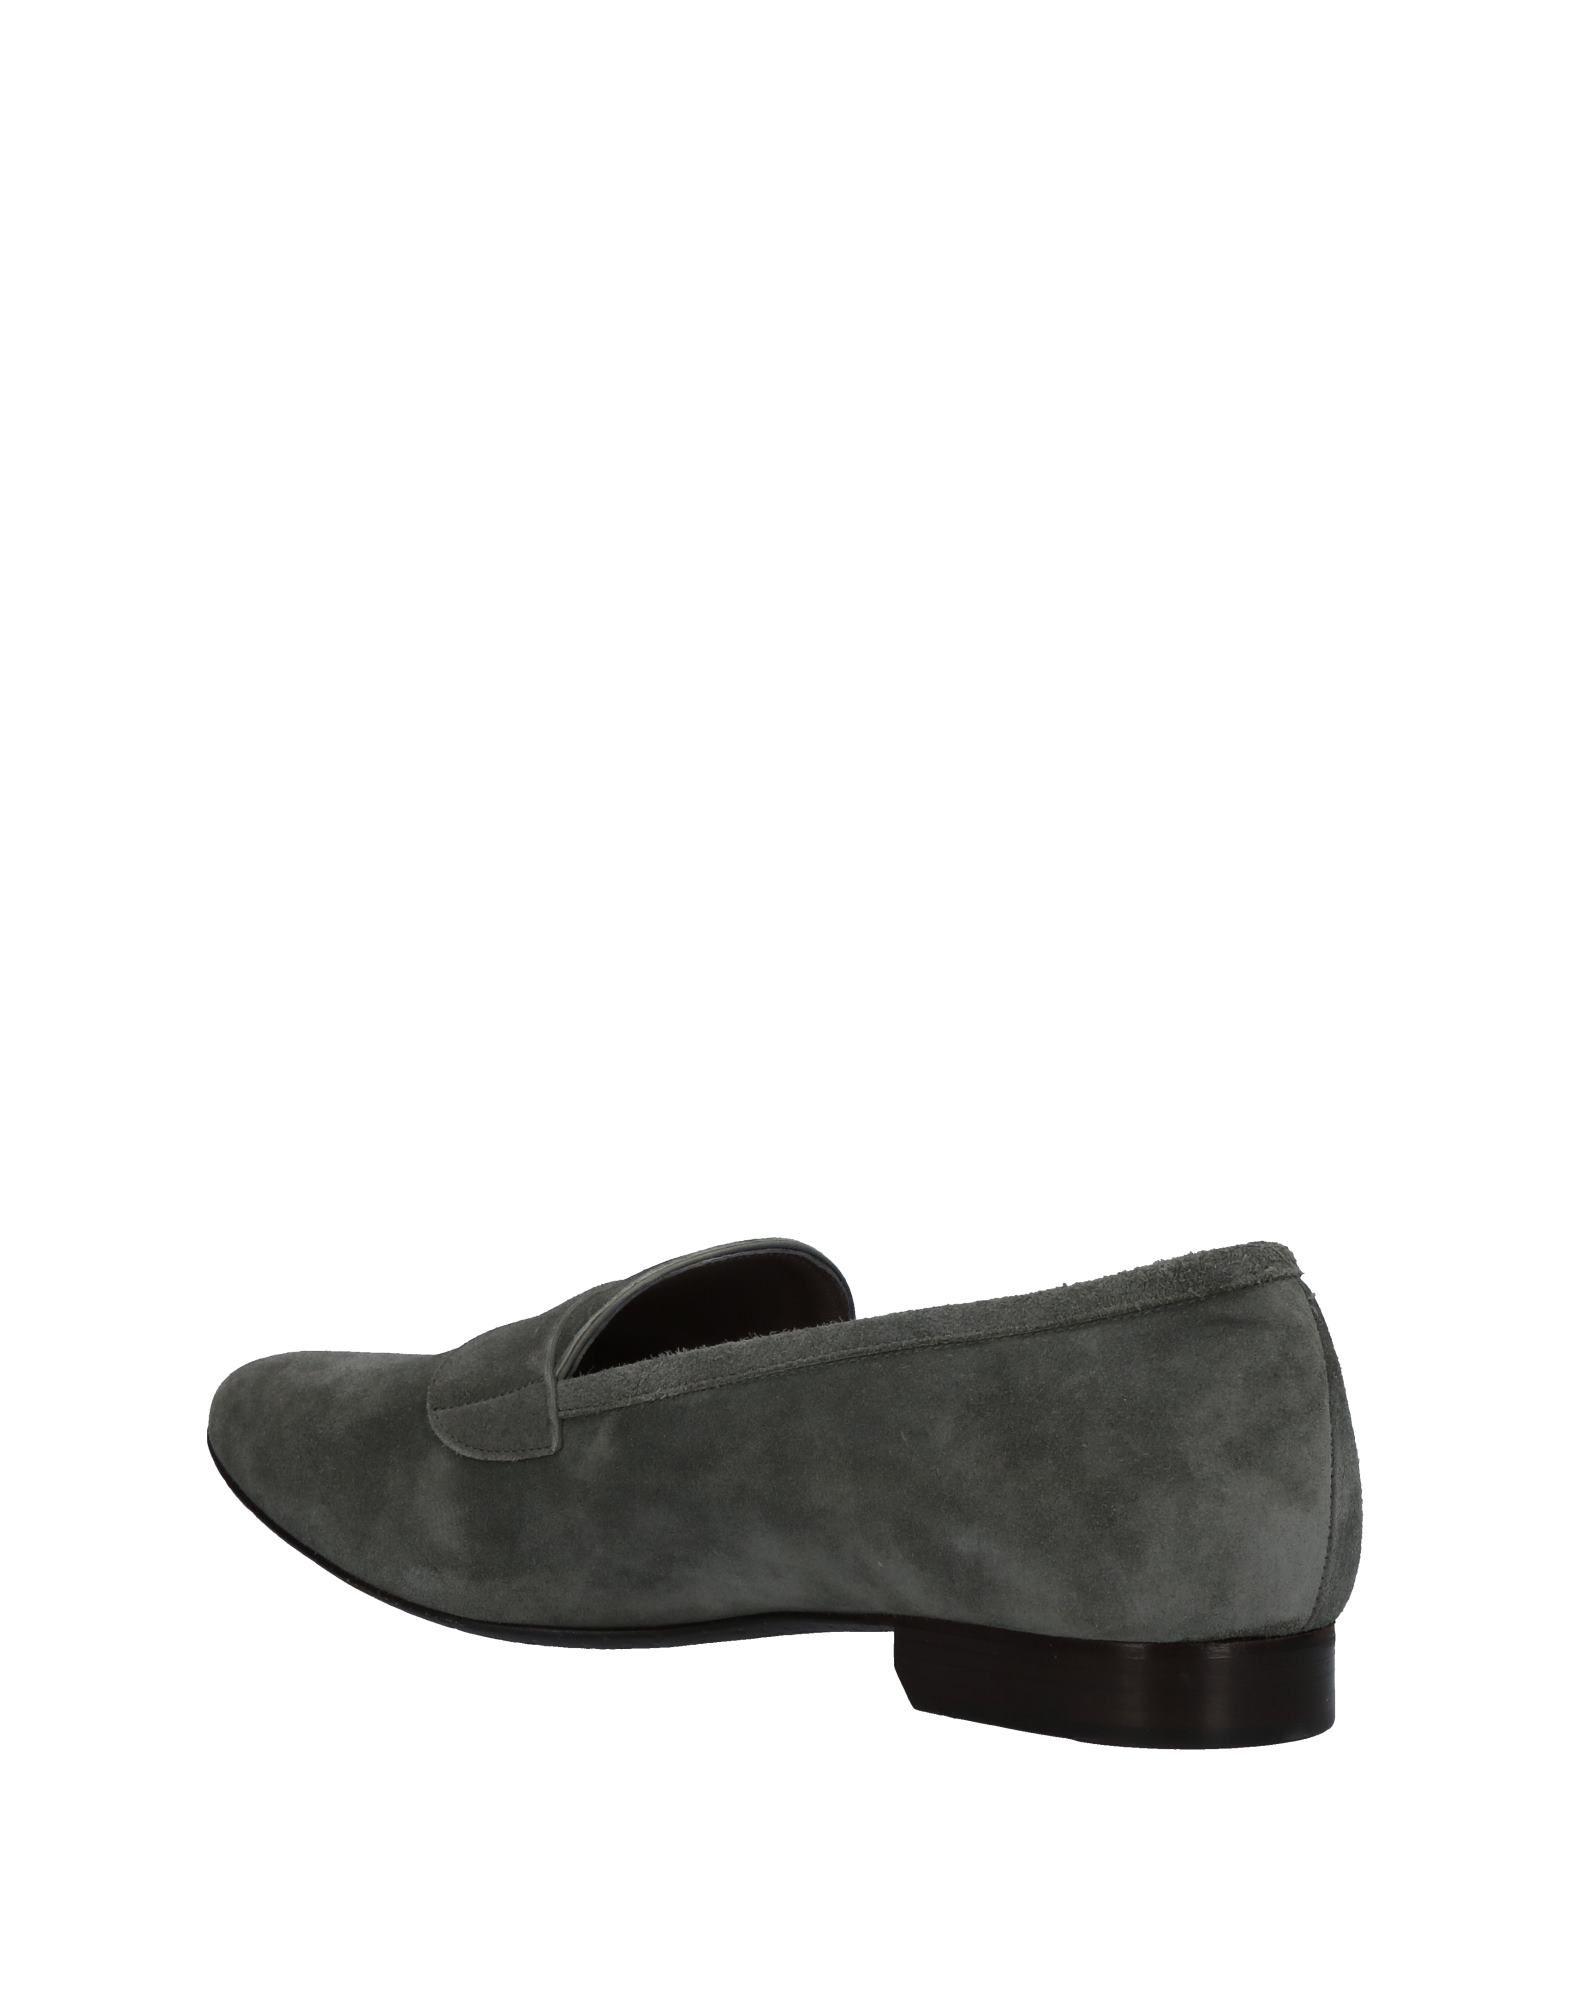 Pedro Garcia Leather Loafer in Grey (Gray) - Lyst